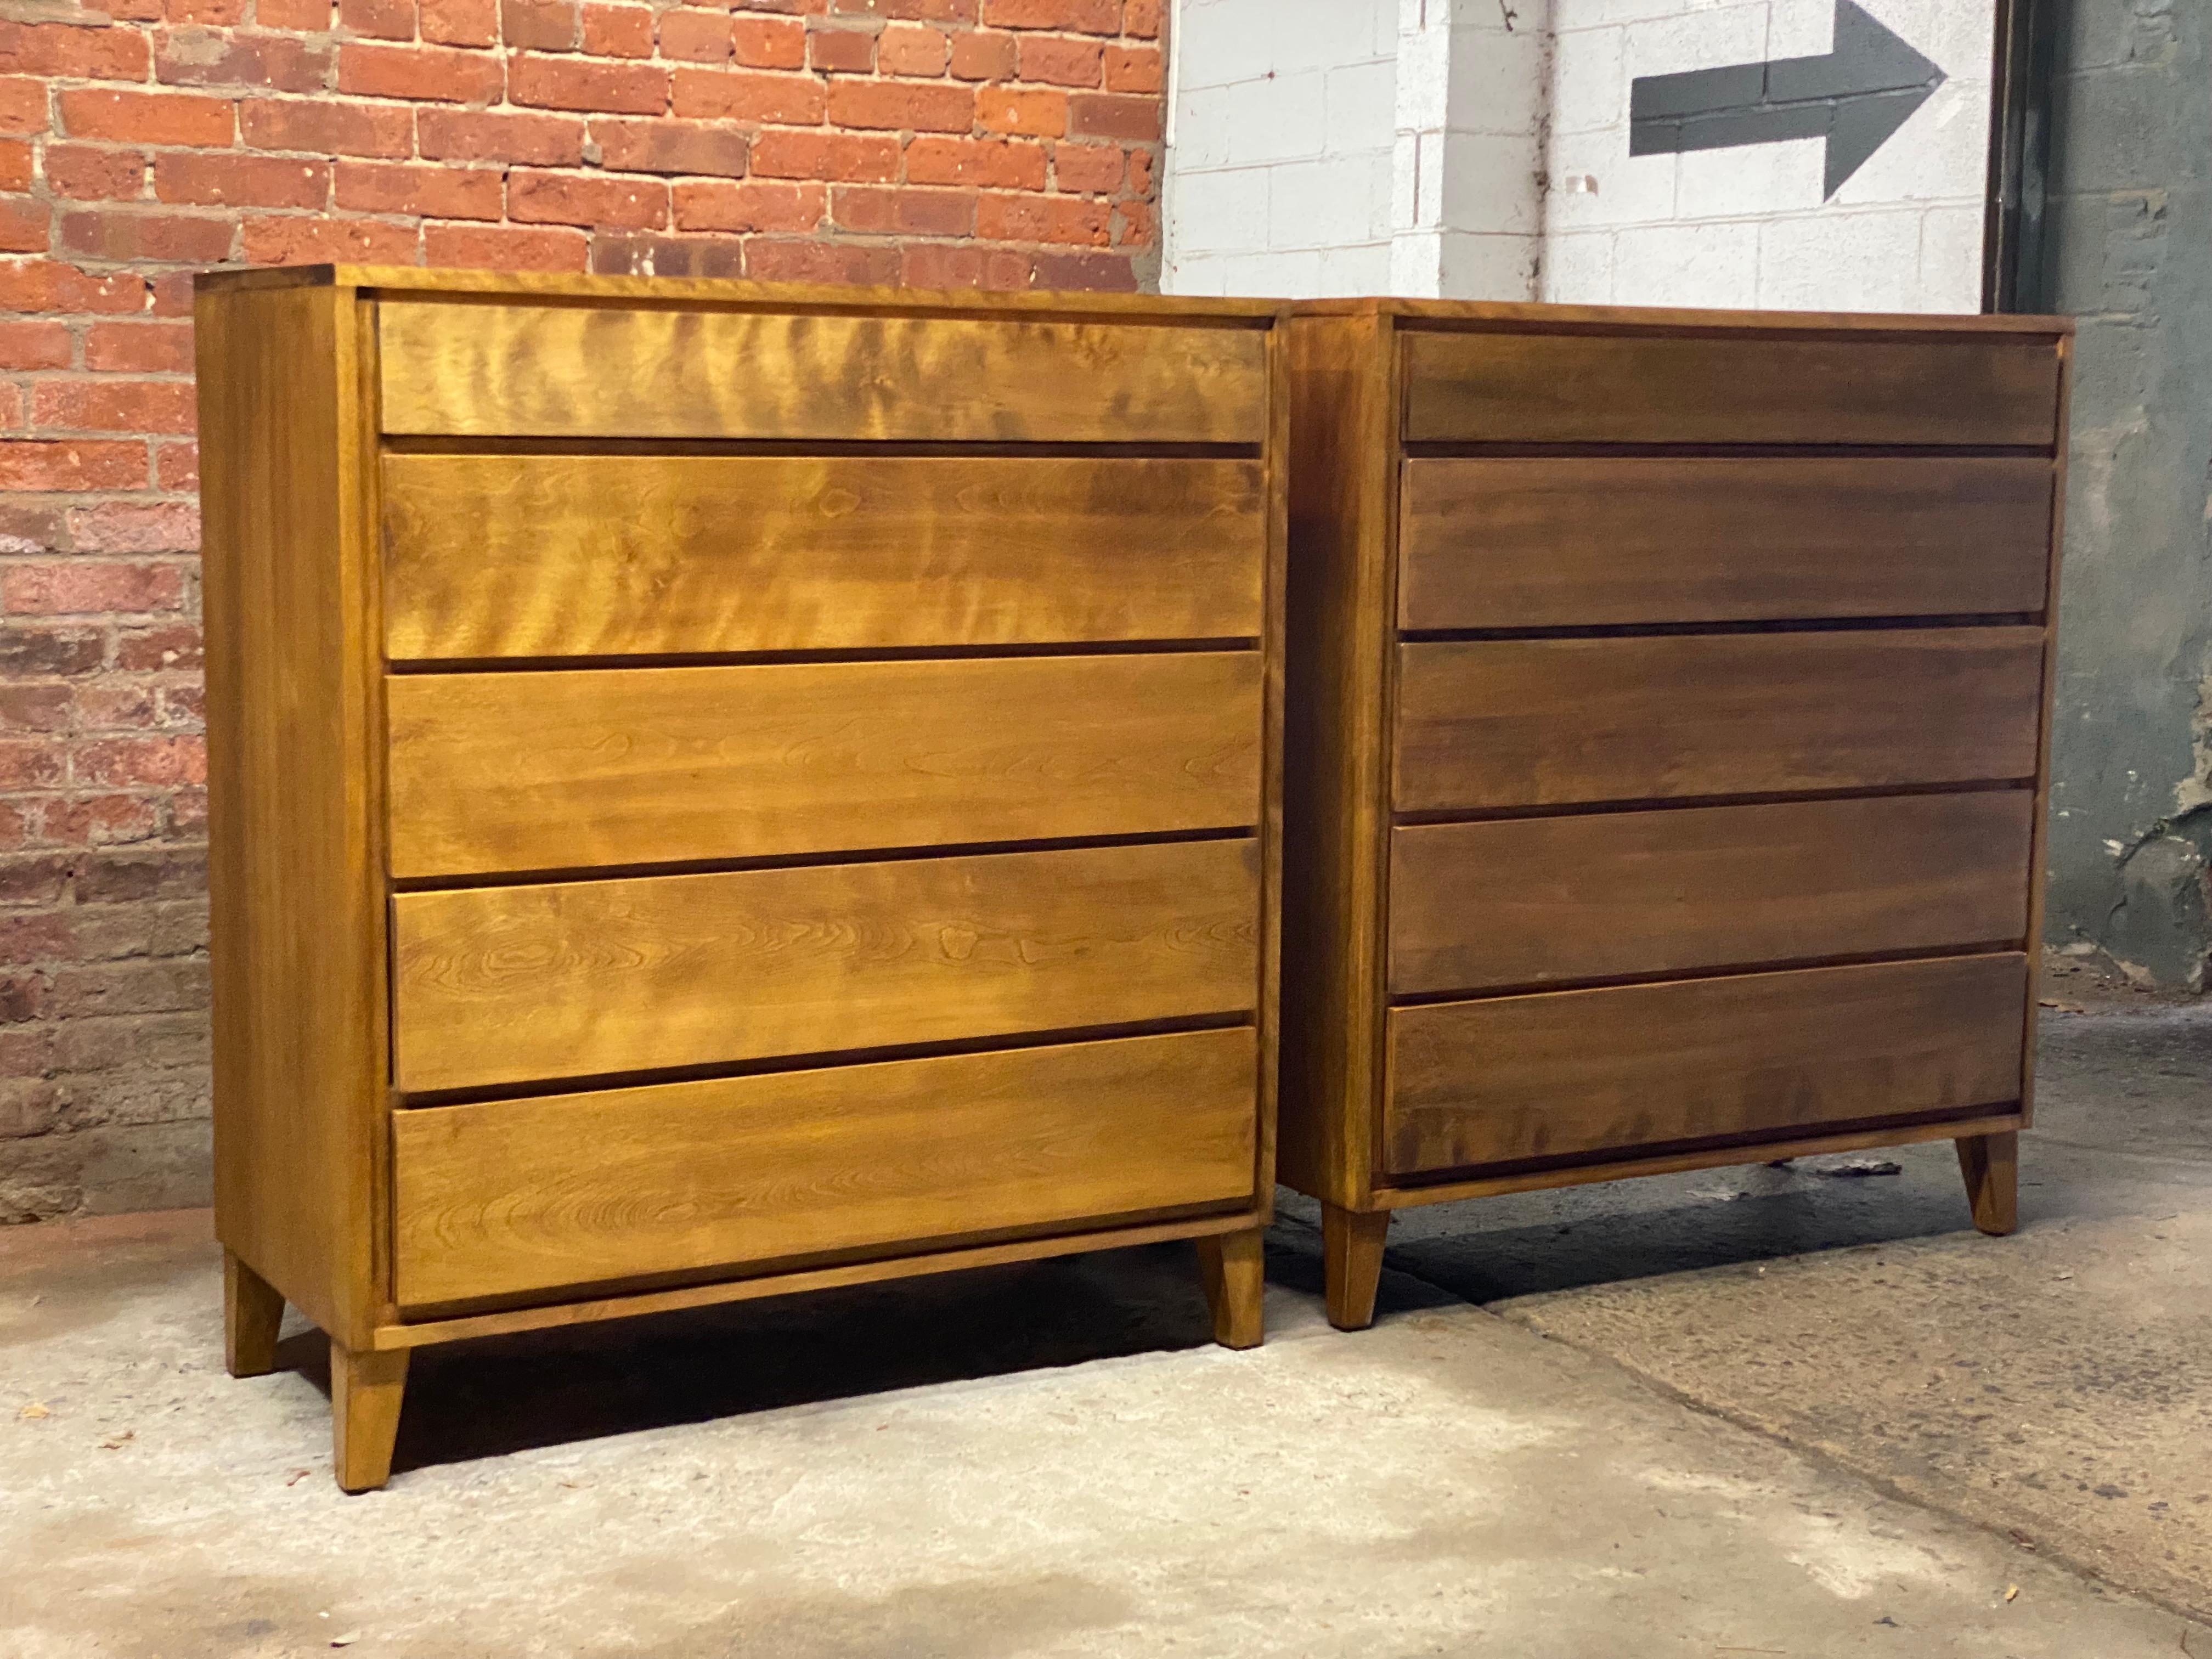 A handsome pair of solid maple five drawer dressers designed by Leslie Diamond for Conant-Ball's American Modern line. Circa 1950-60. The dressers feature tapered block feet, drawer dividers in the second drawer, deep drawers for maximum storage,